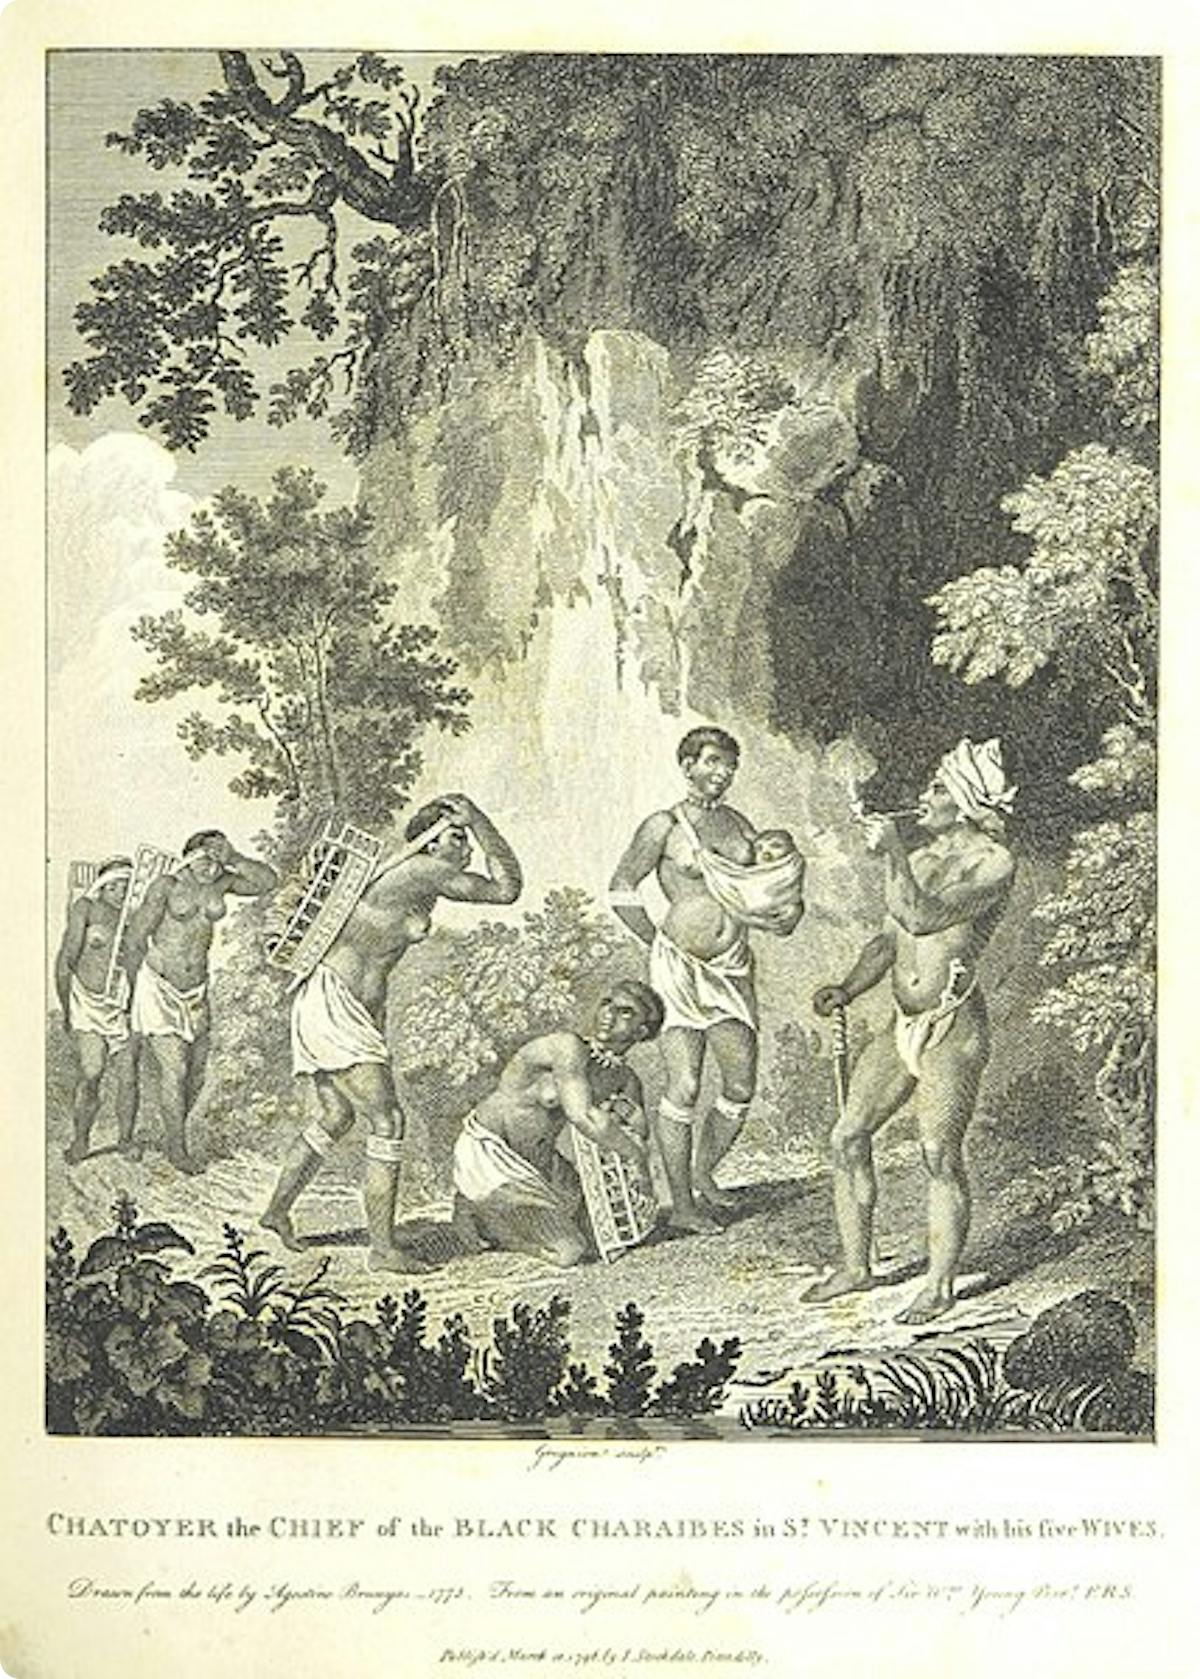 'Chatoya, the chief of the Black Charaibes in St.Vincent', 1801, Bryan Edwards.